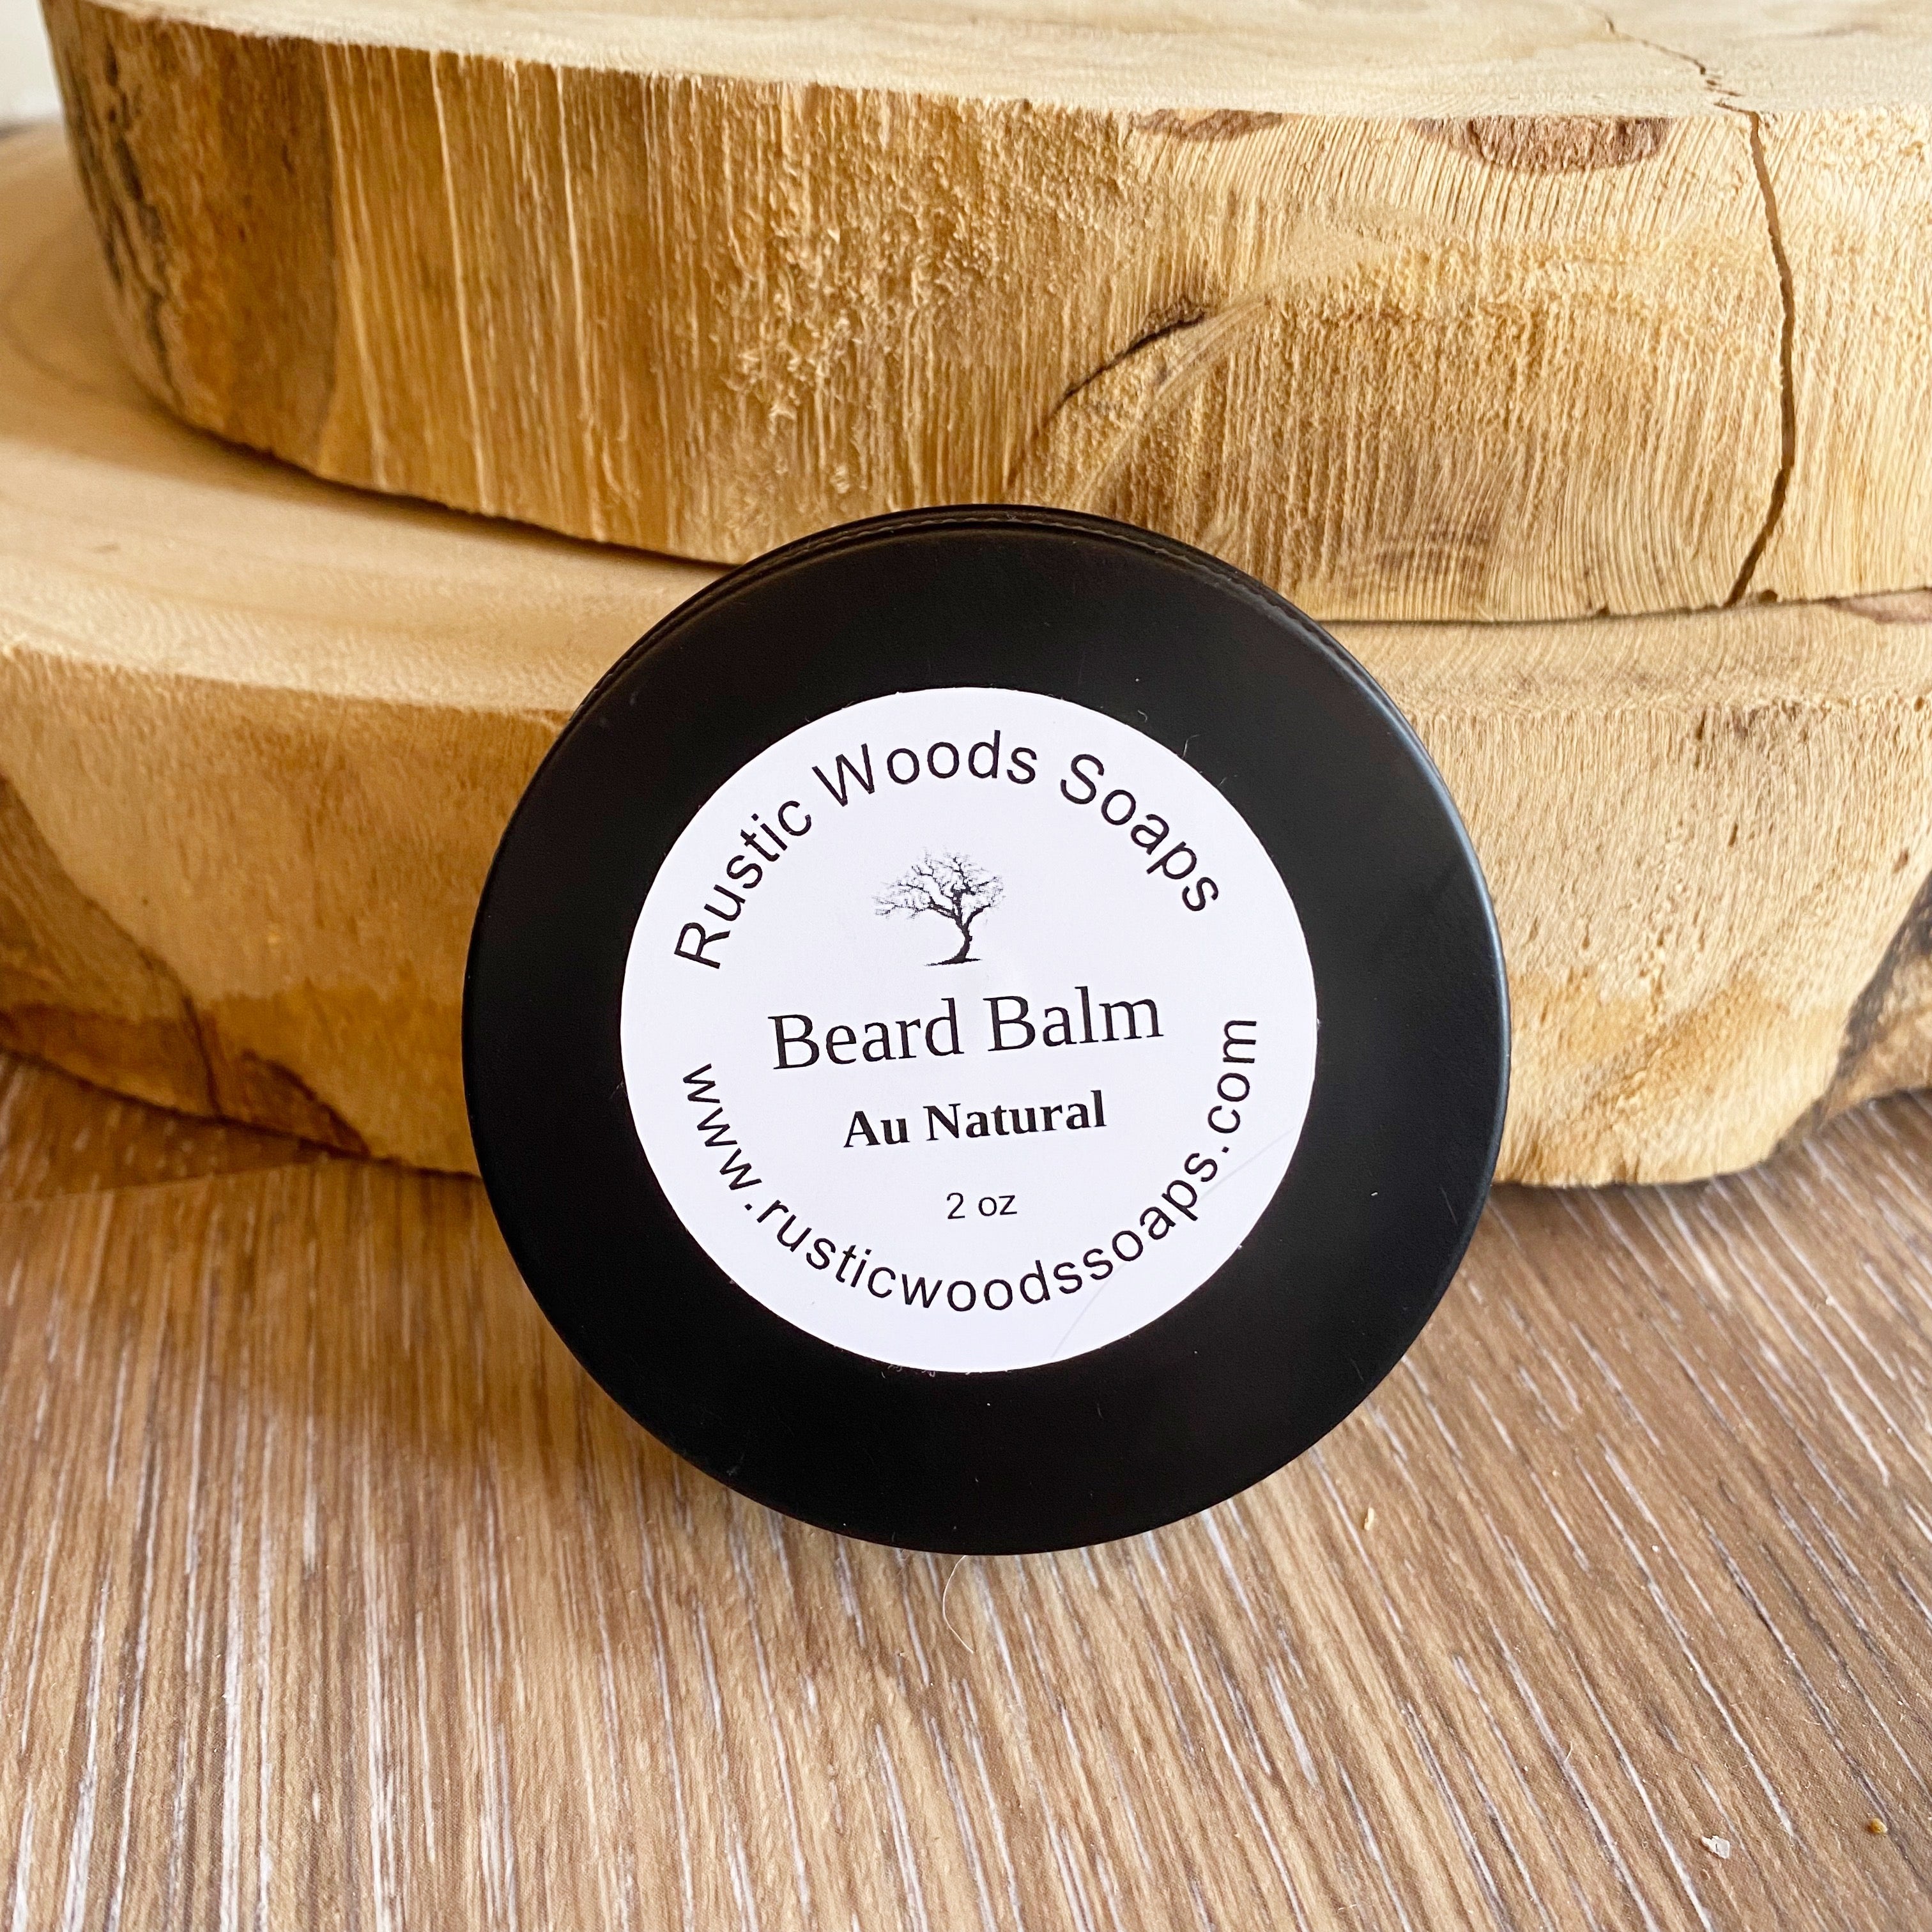 Black canister jar with white rustic woods soaps au natural beard balm label leans against wood pieces